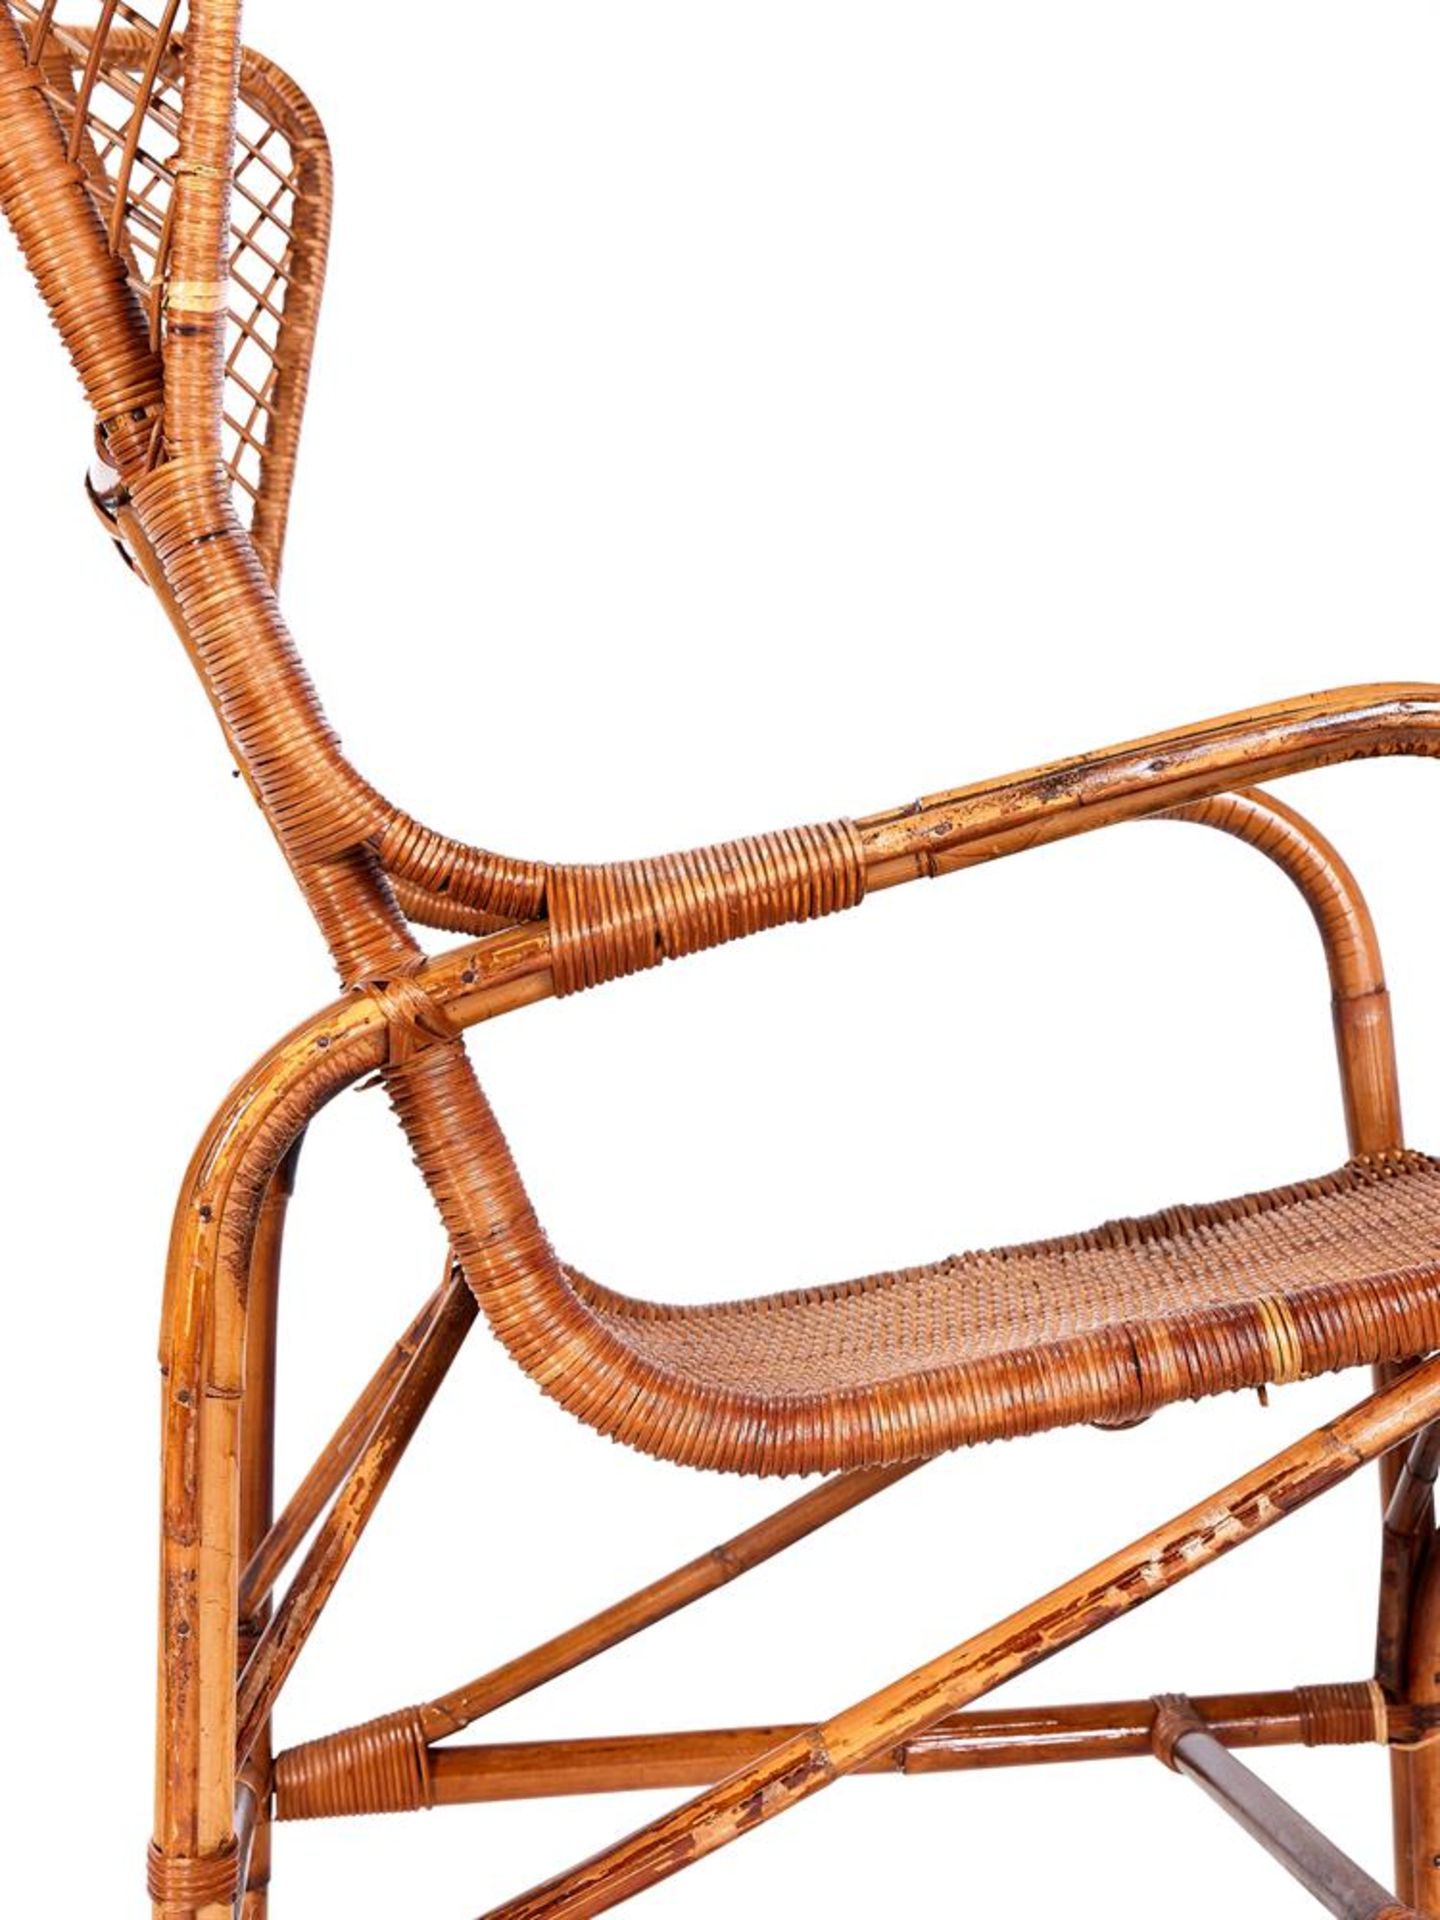 A SET OF FOUR RATTAN OPEN ARMCHAIRS ATTRIBUTED TO EUGENIA ALBERTO REGGIO MANUFACTURED BY CICERI - Image 2 of 4